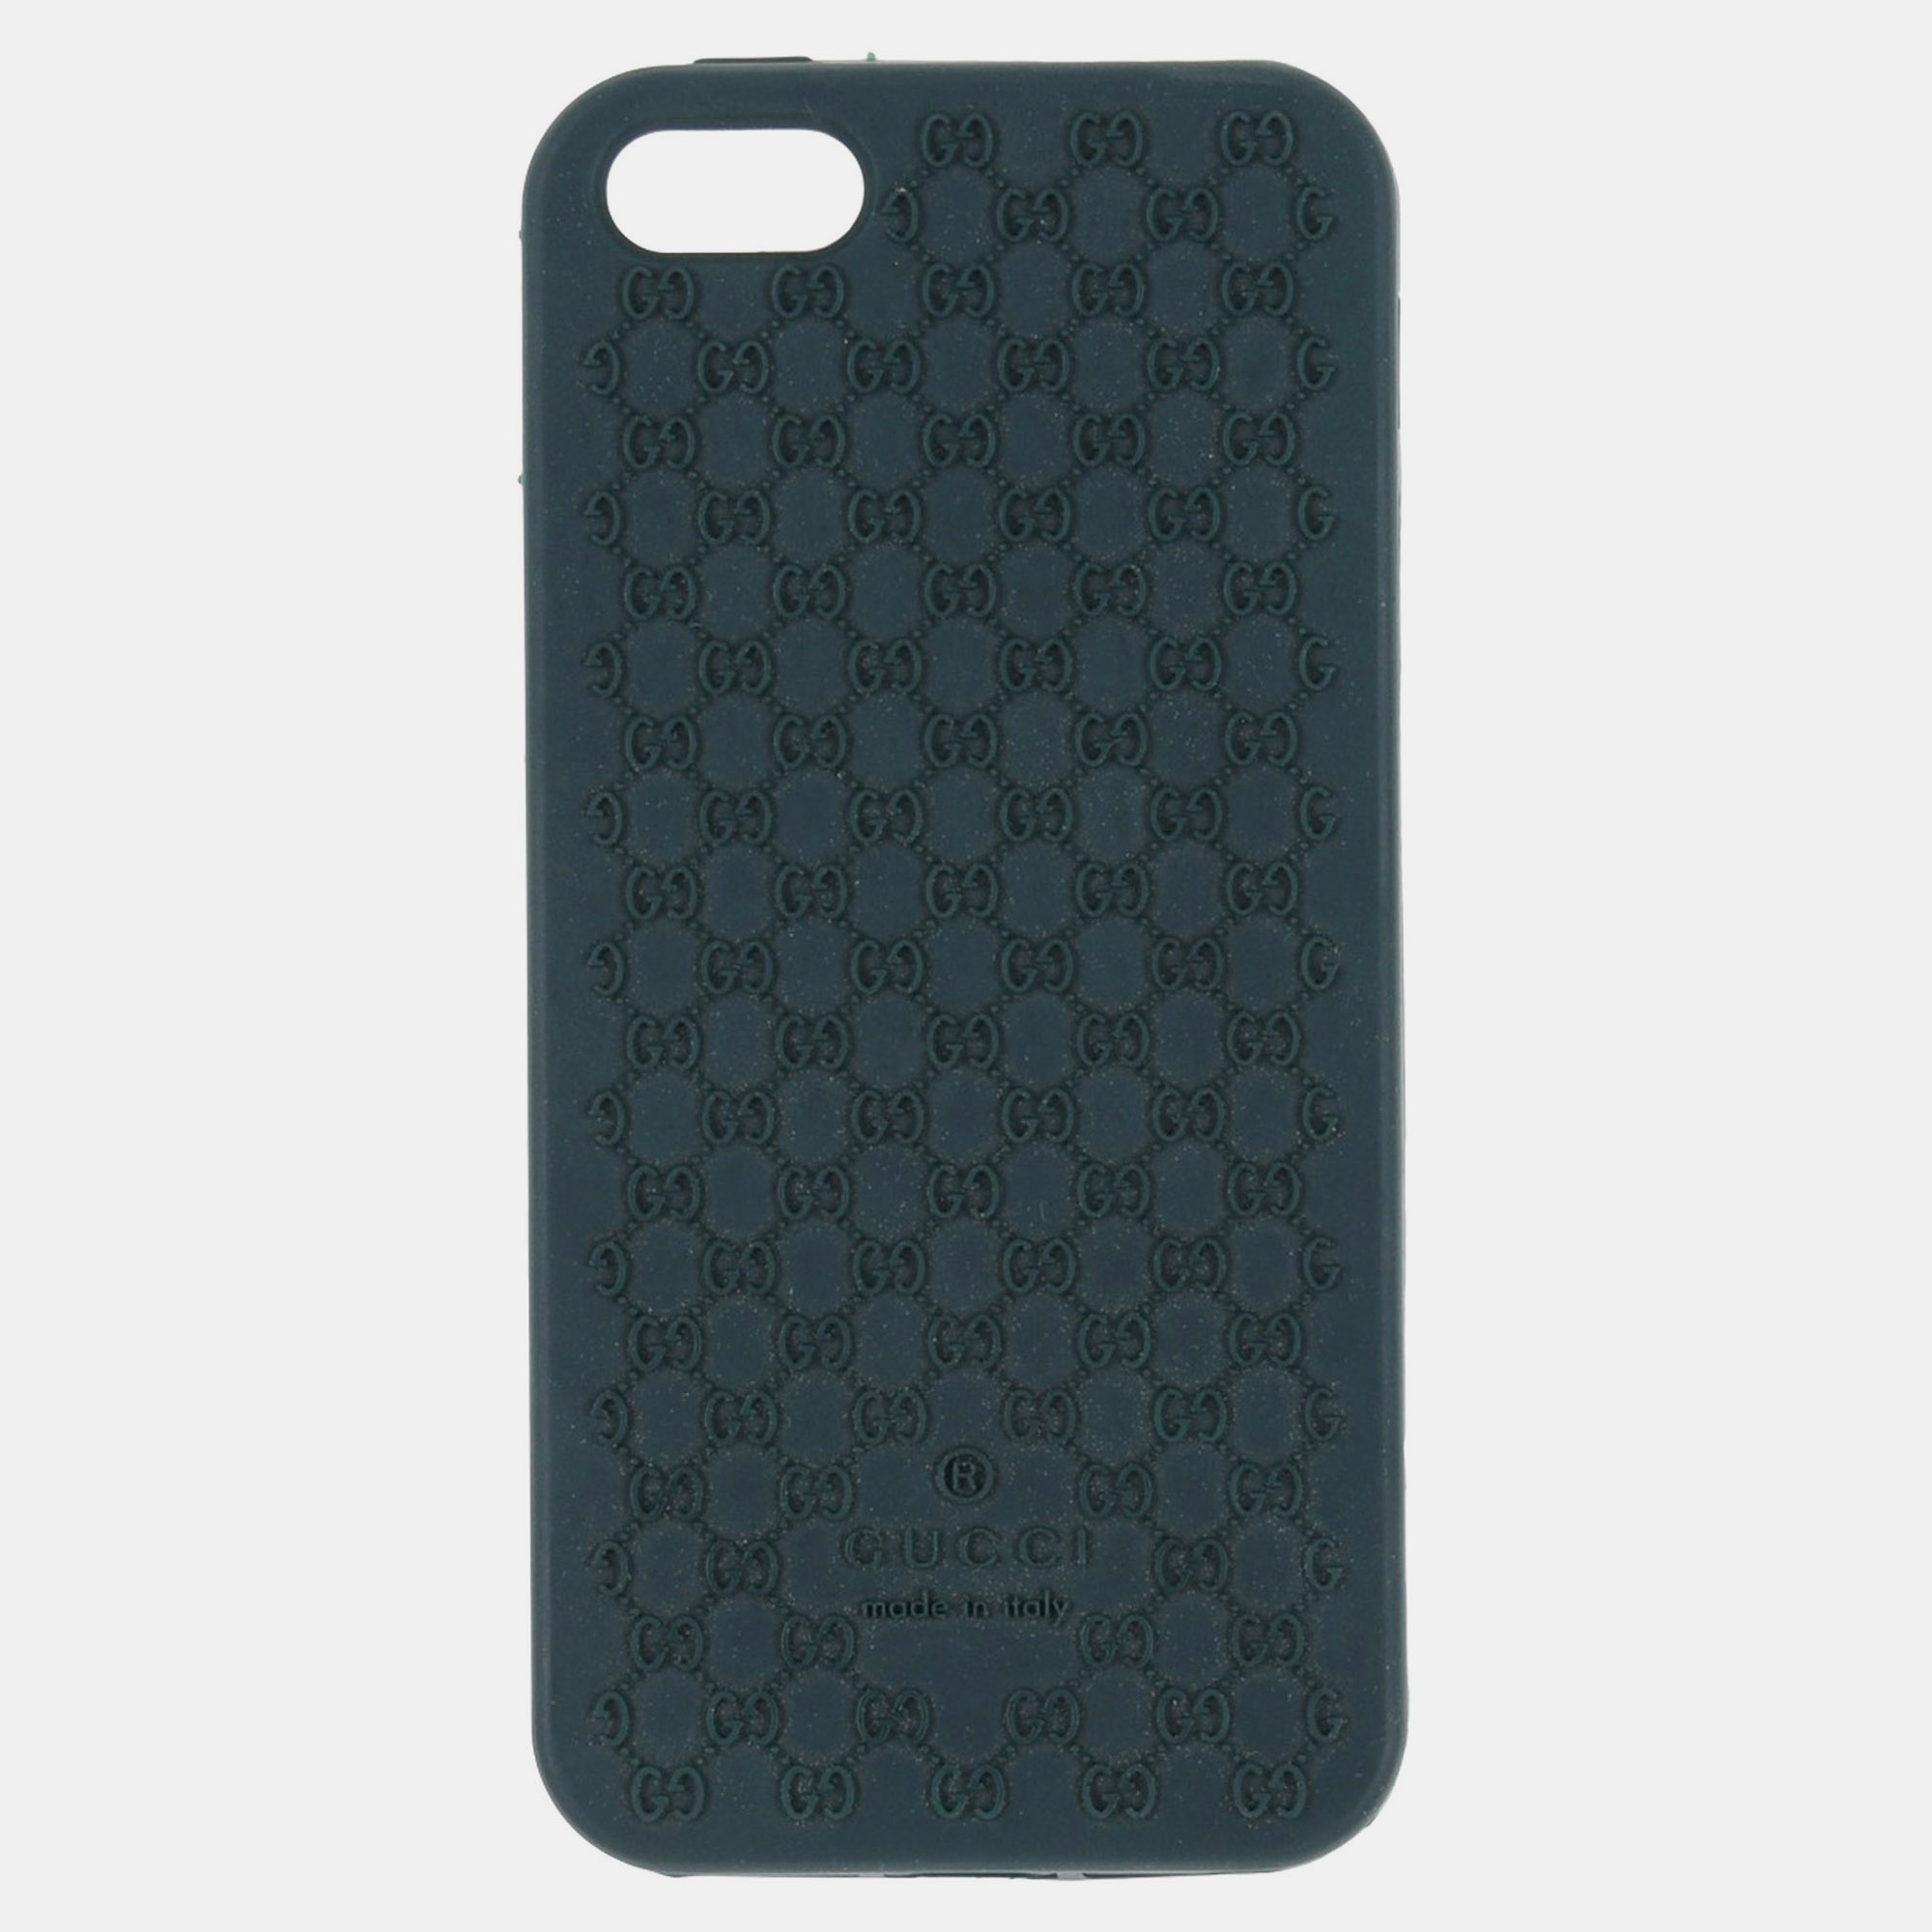 Gucci green rubber iphone 5/5s cover